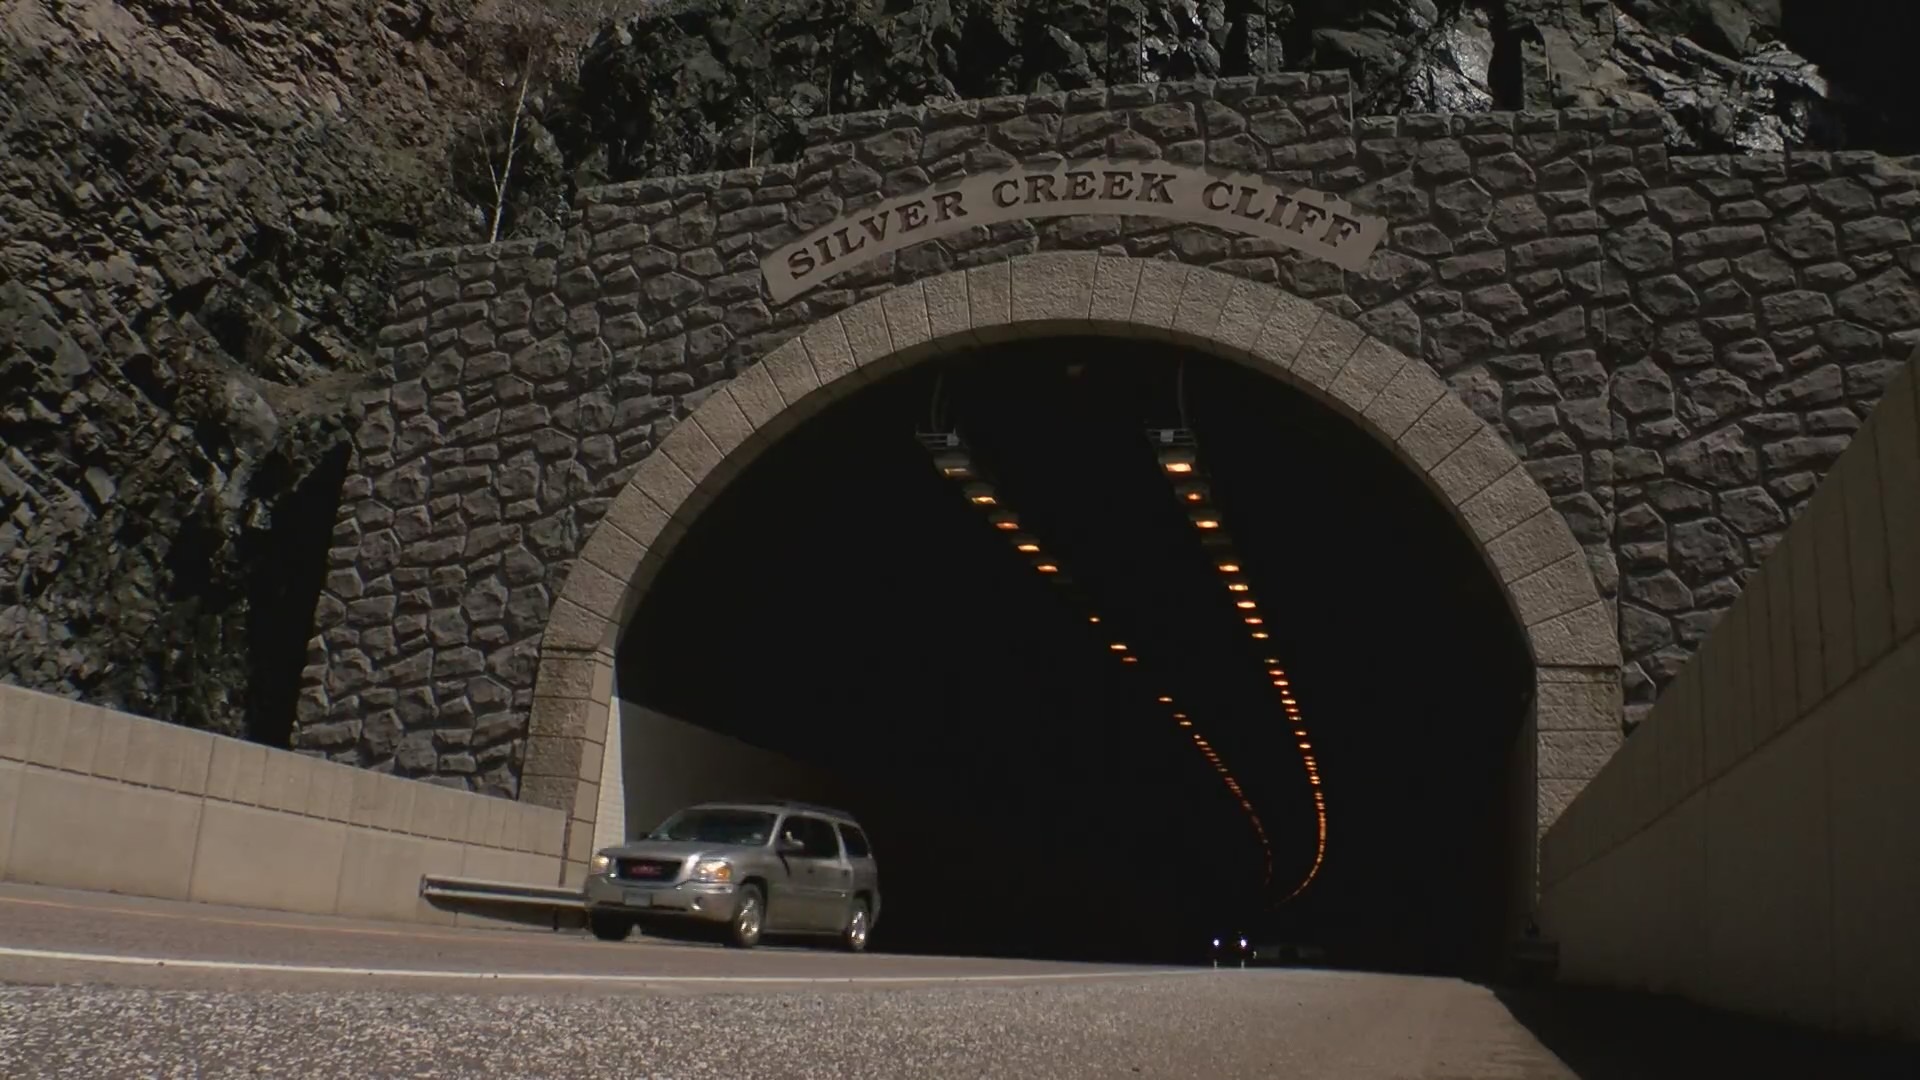 The Incredible Challenges It Took To Build Silver Creek Cliff Tunnel Along North Shore – WCCO